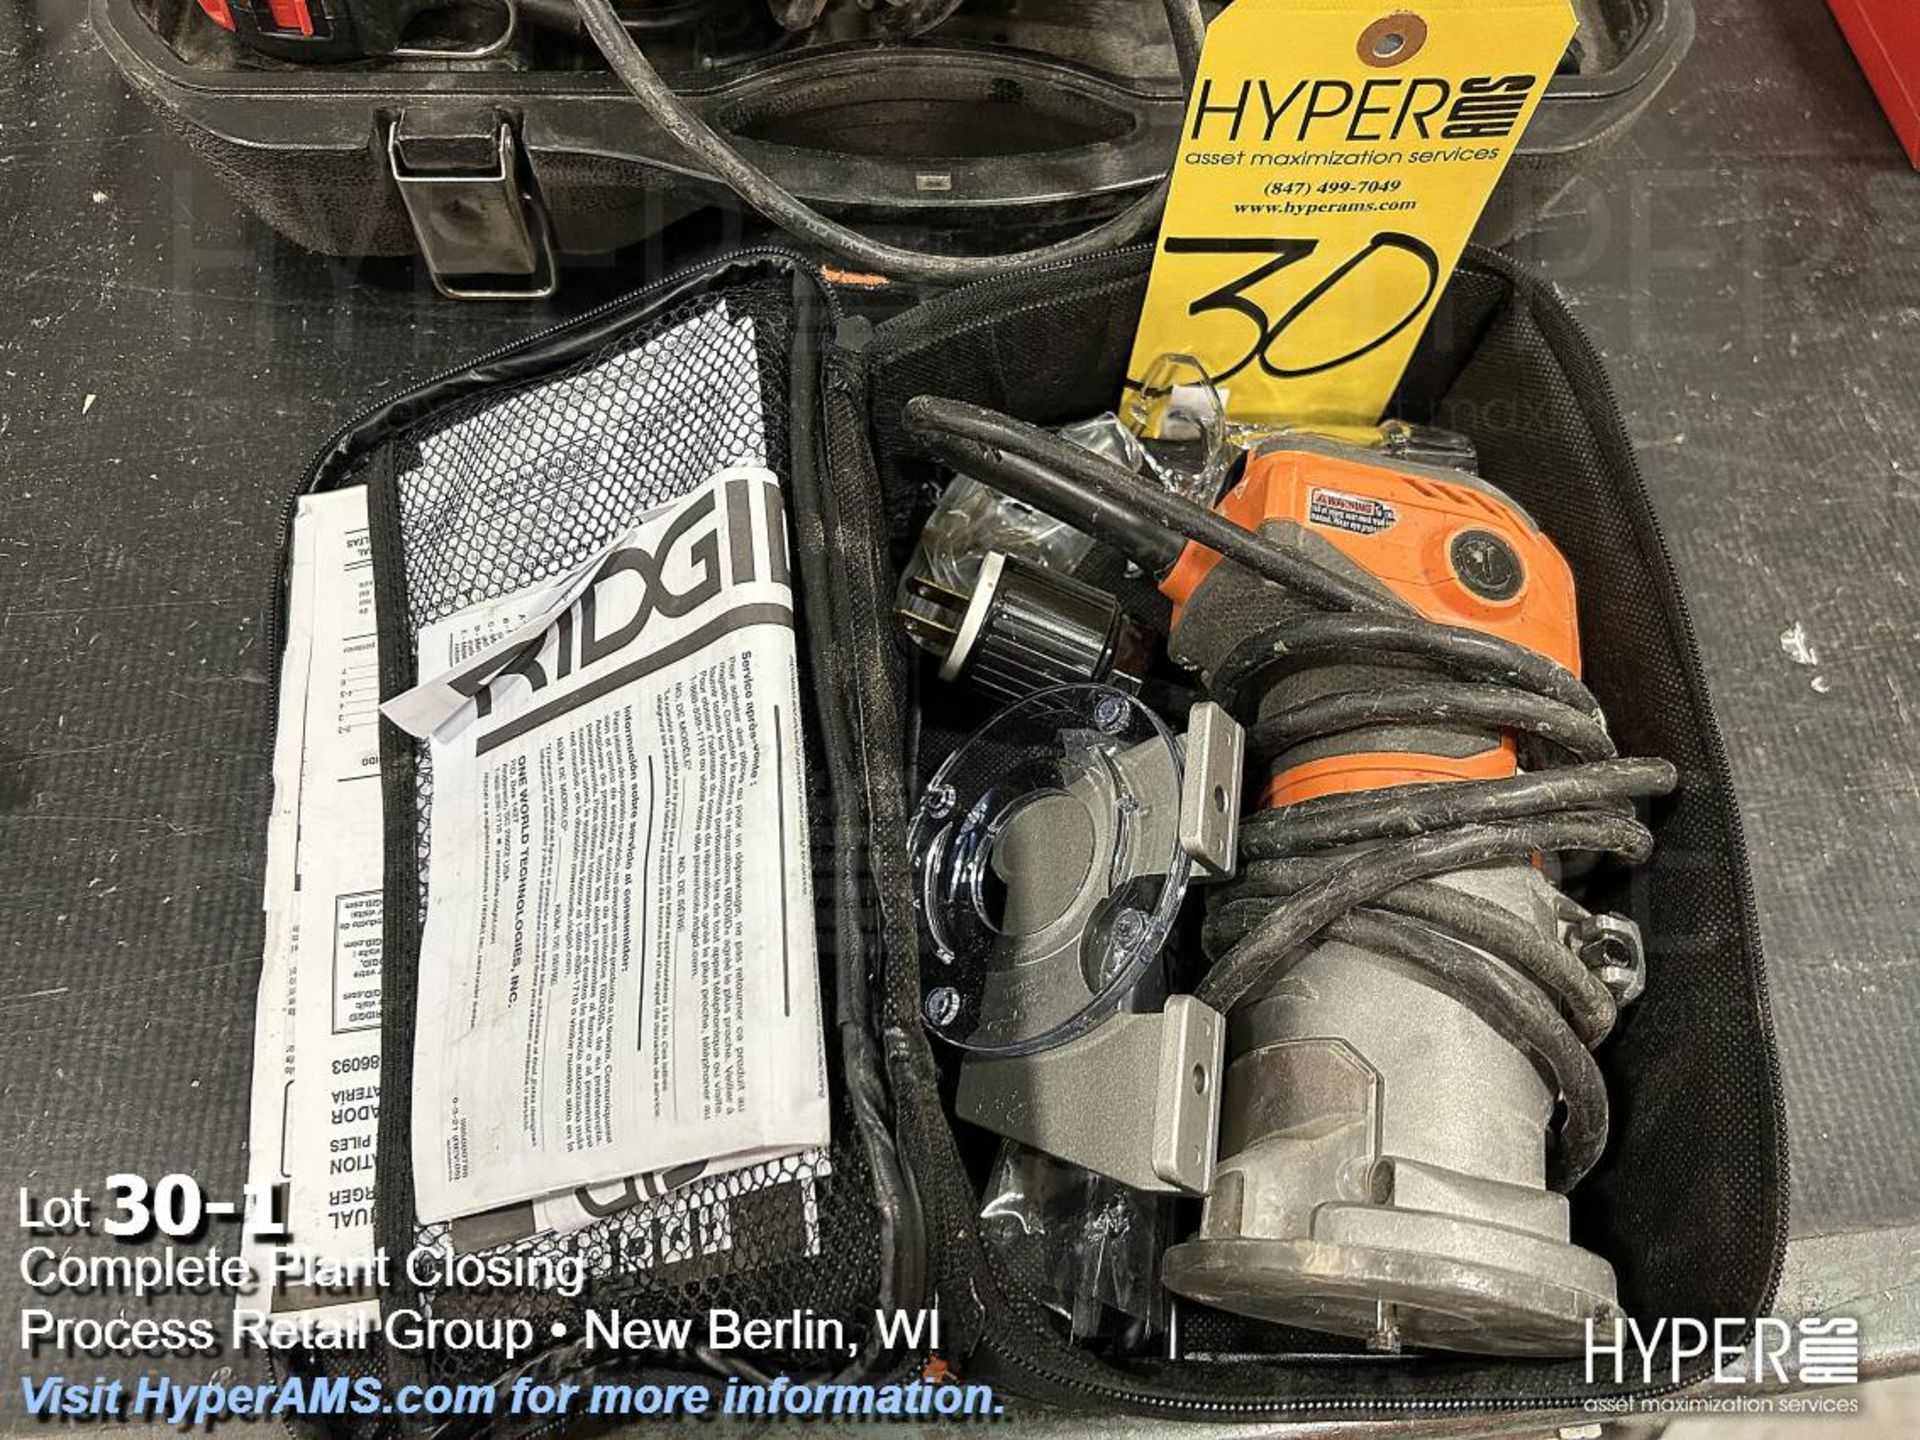 Ridgid compact router